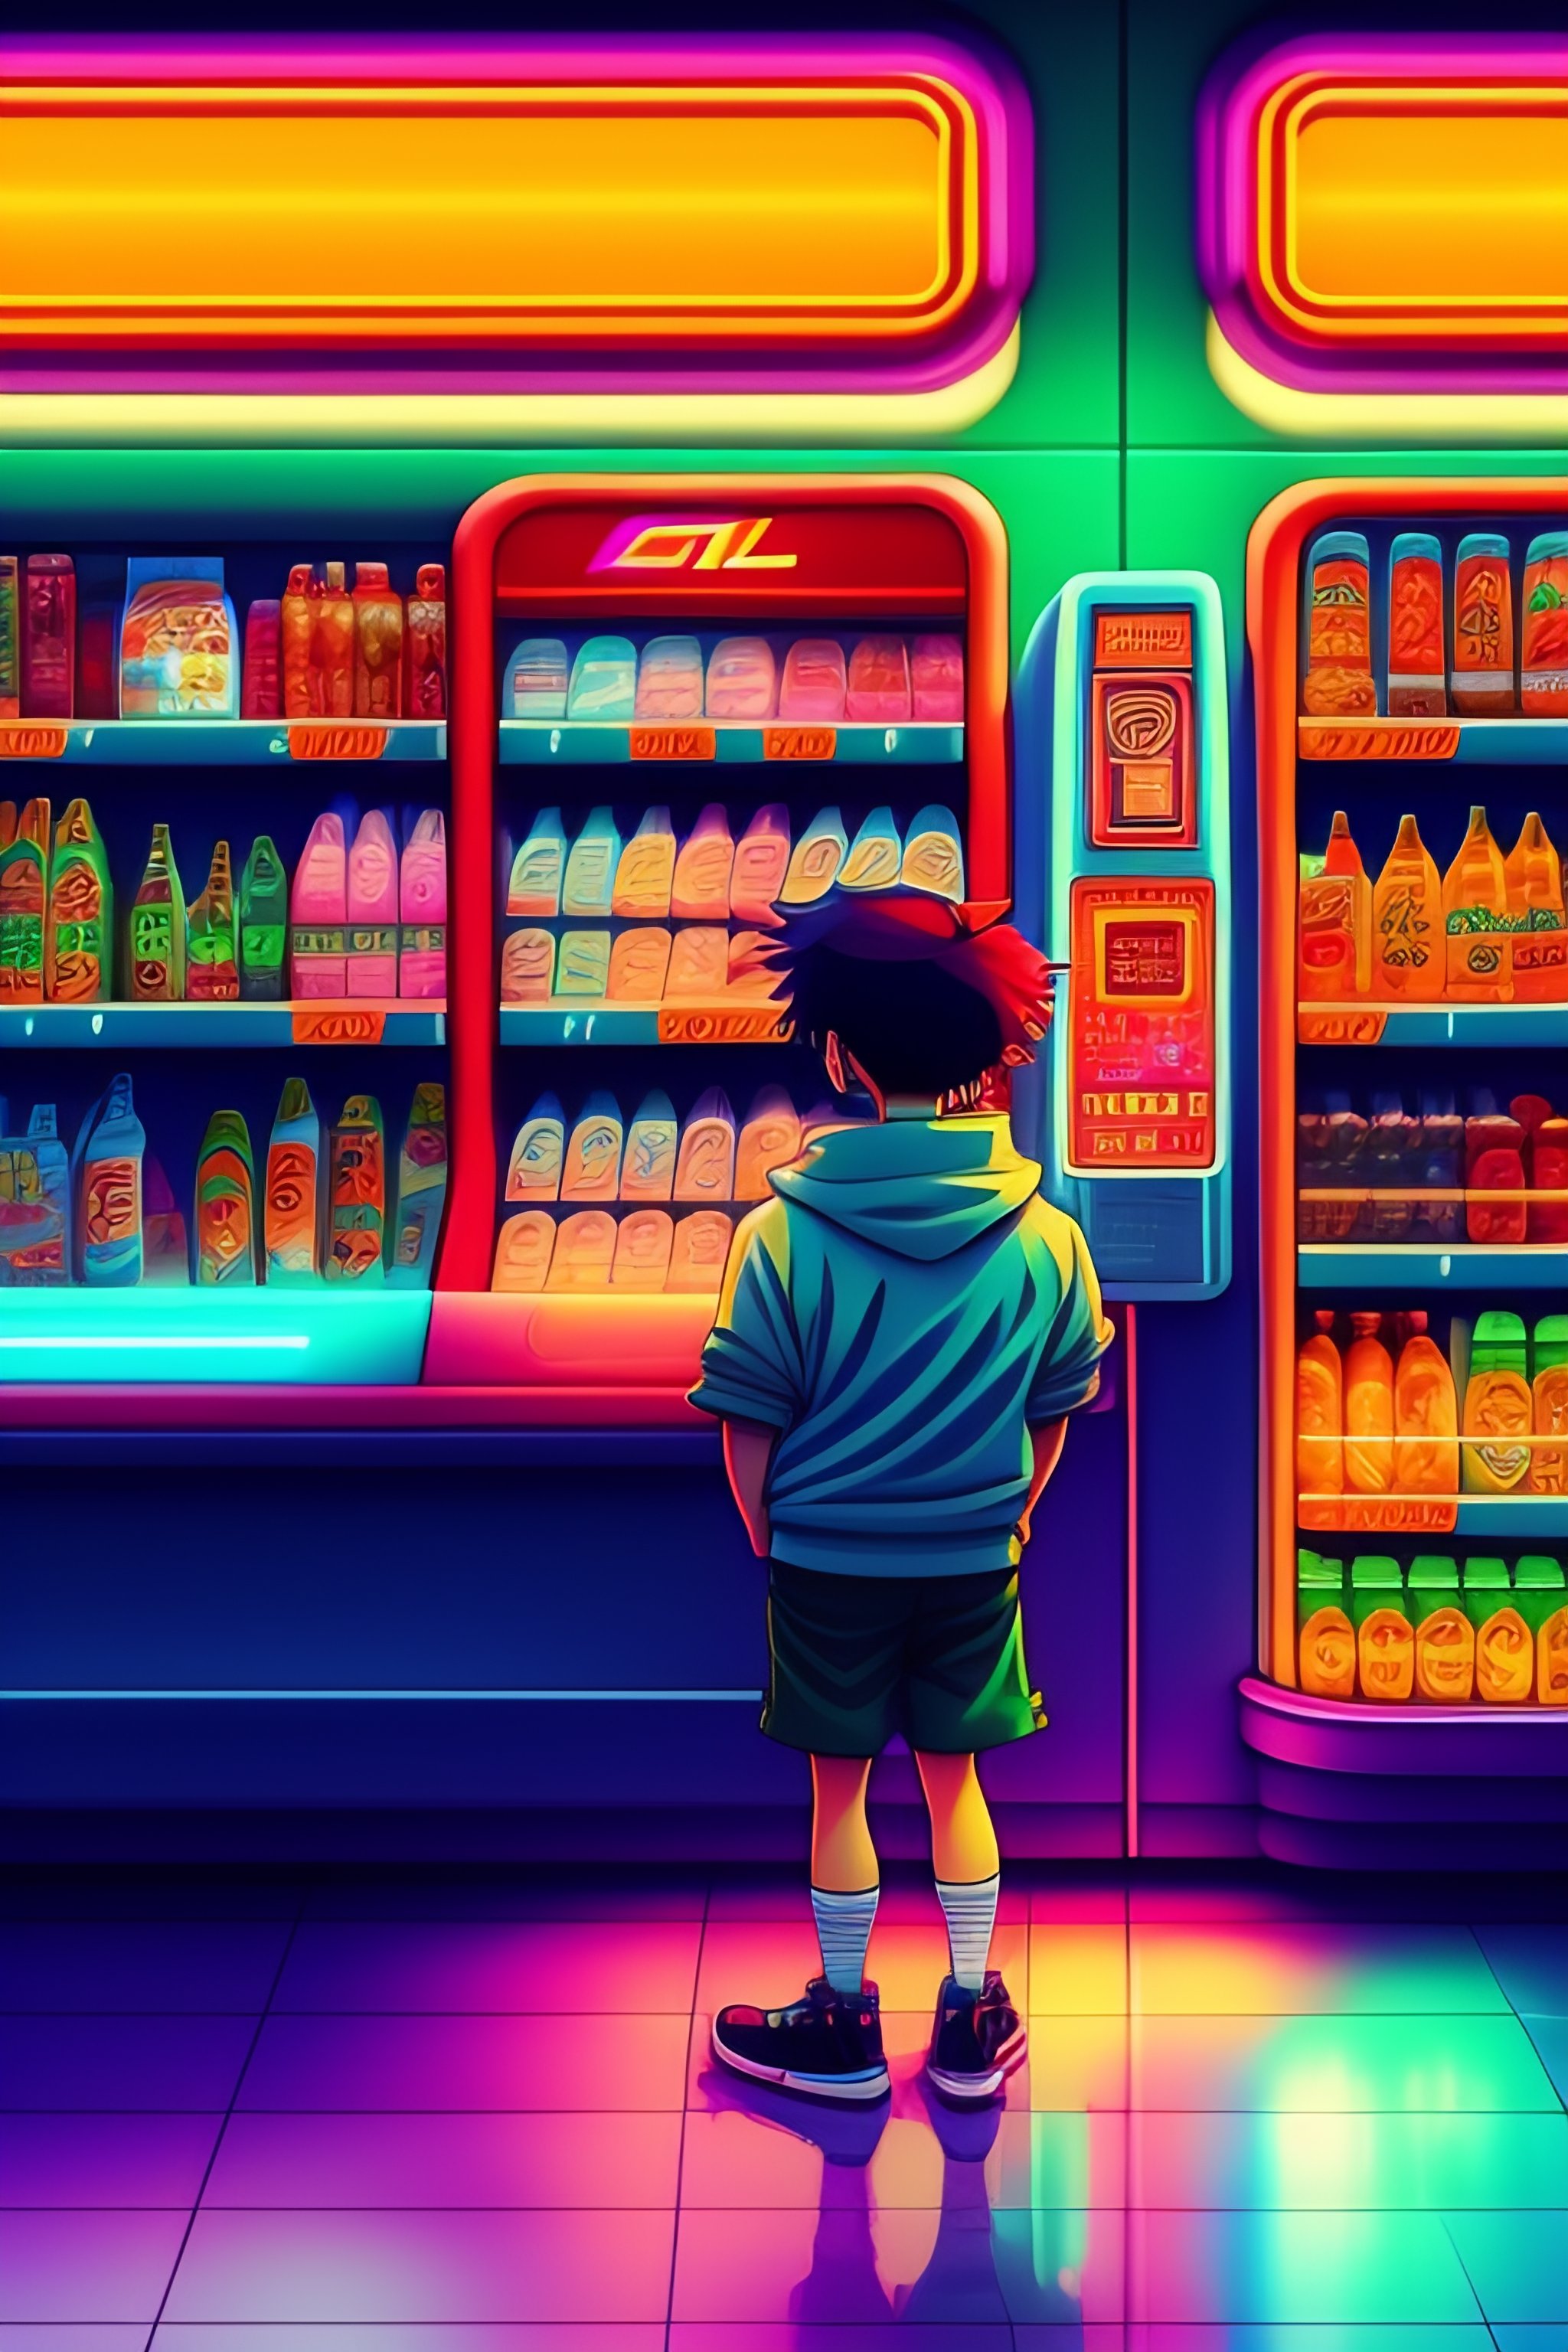 Lexica - Boy inside a 7/11 convenience store. drink aisle in the style ...